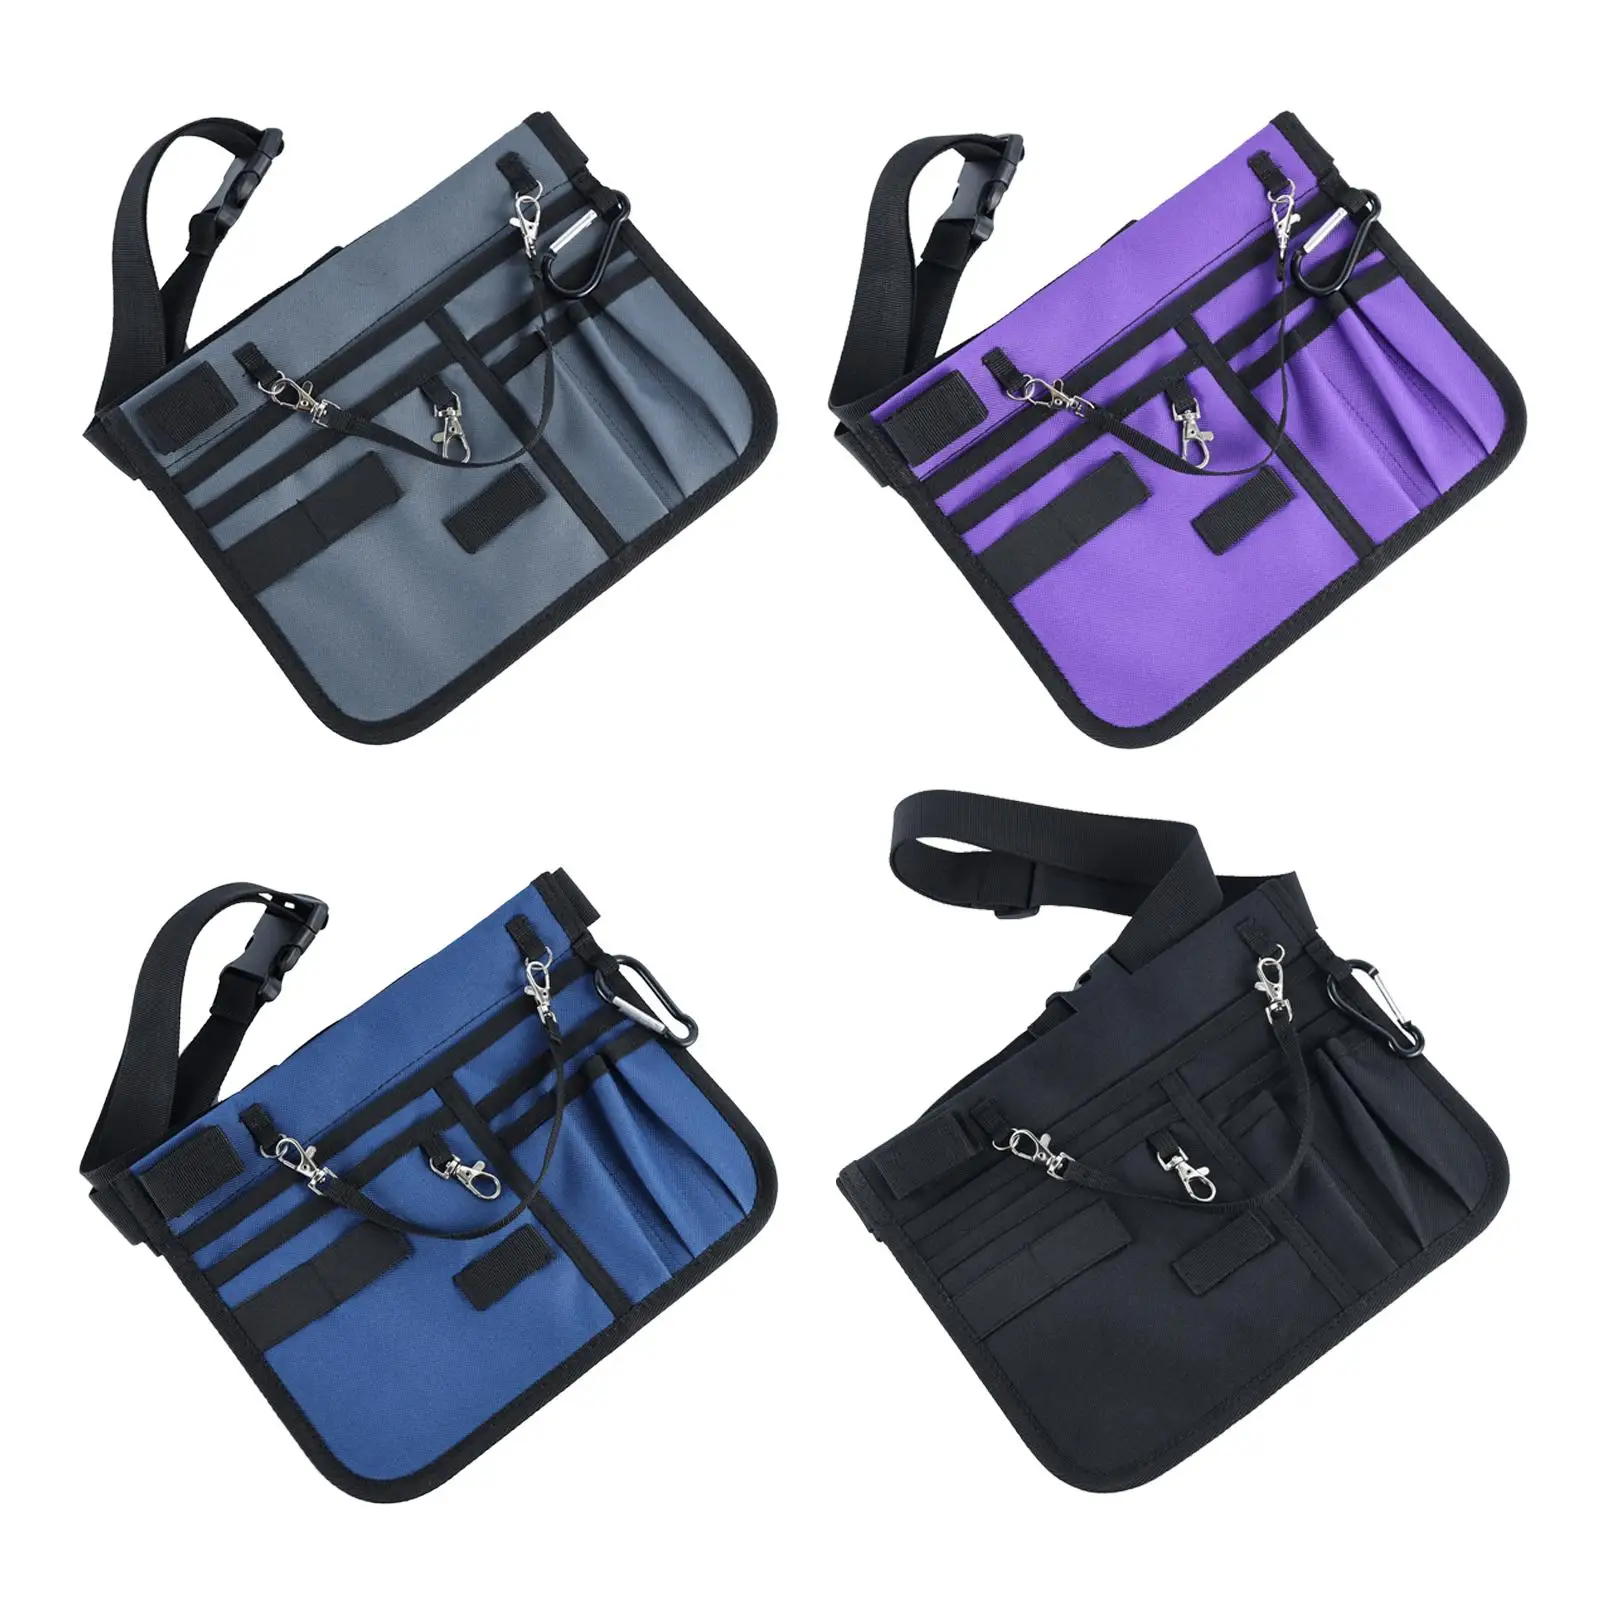 Fanny Pack Nursing Accessories with Adjustable Belt Multifunctional Oxford Cloth Multi Compartment Waist Pouch for Work Supplies